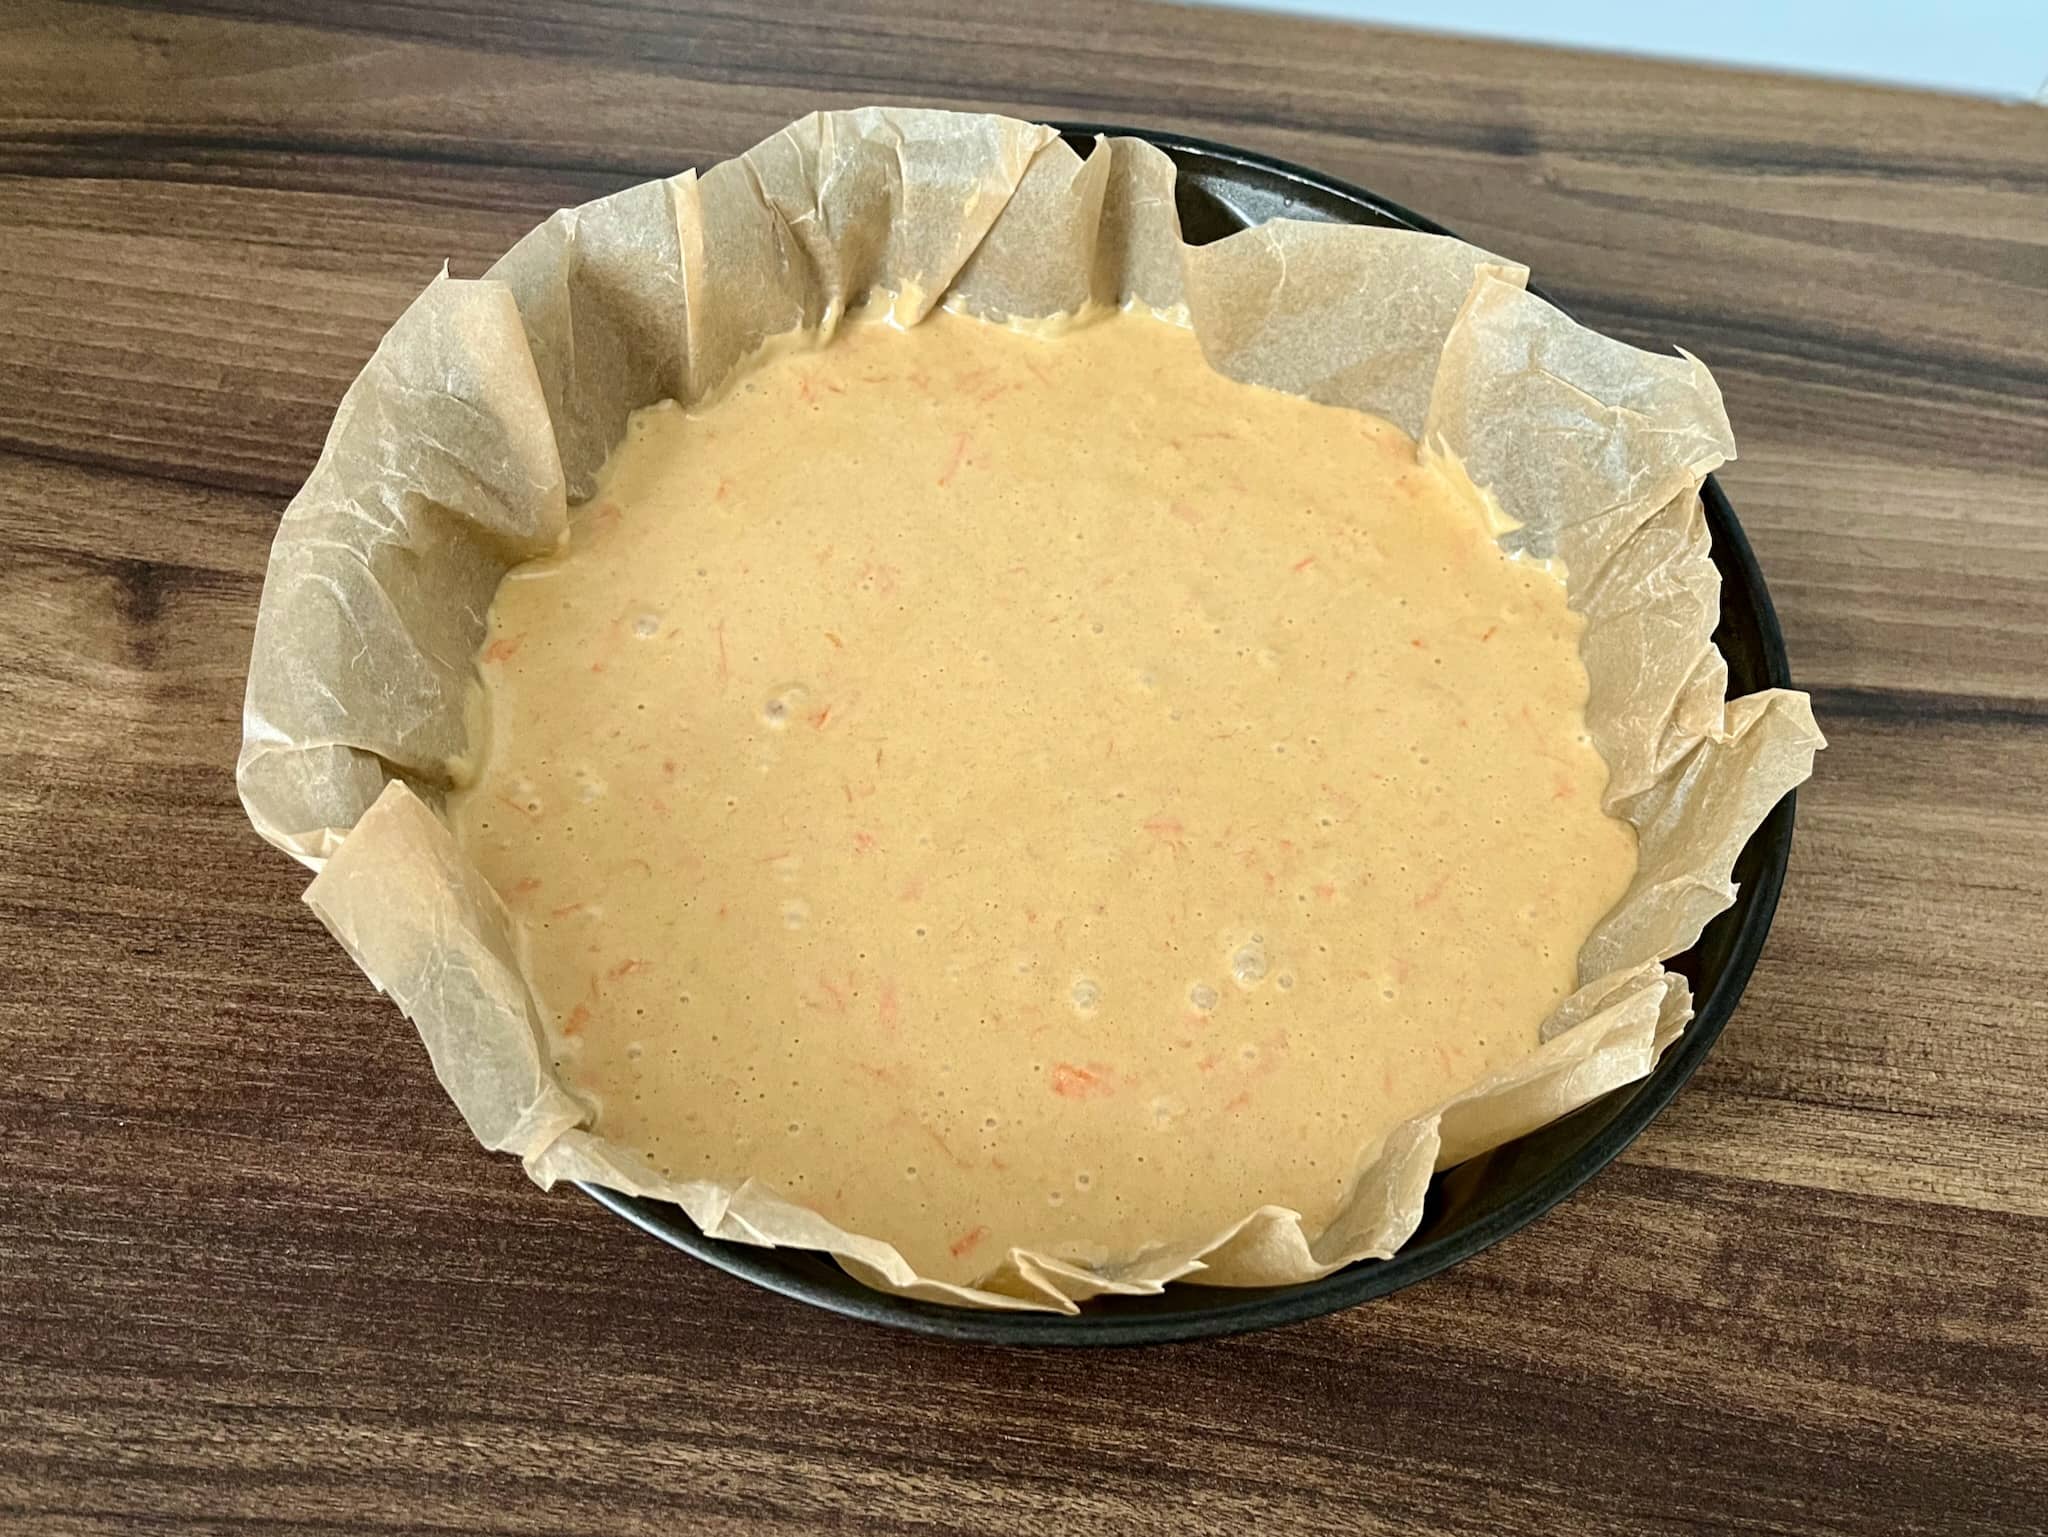 The cake mixture is in a baking pan, just before baking